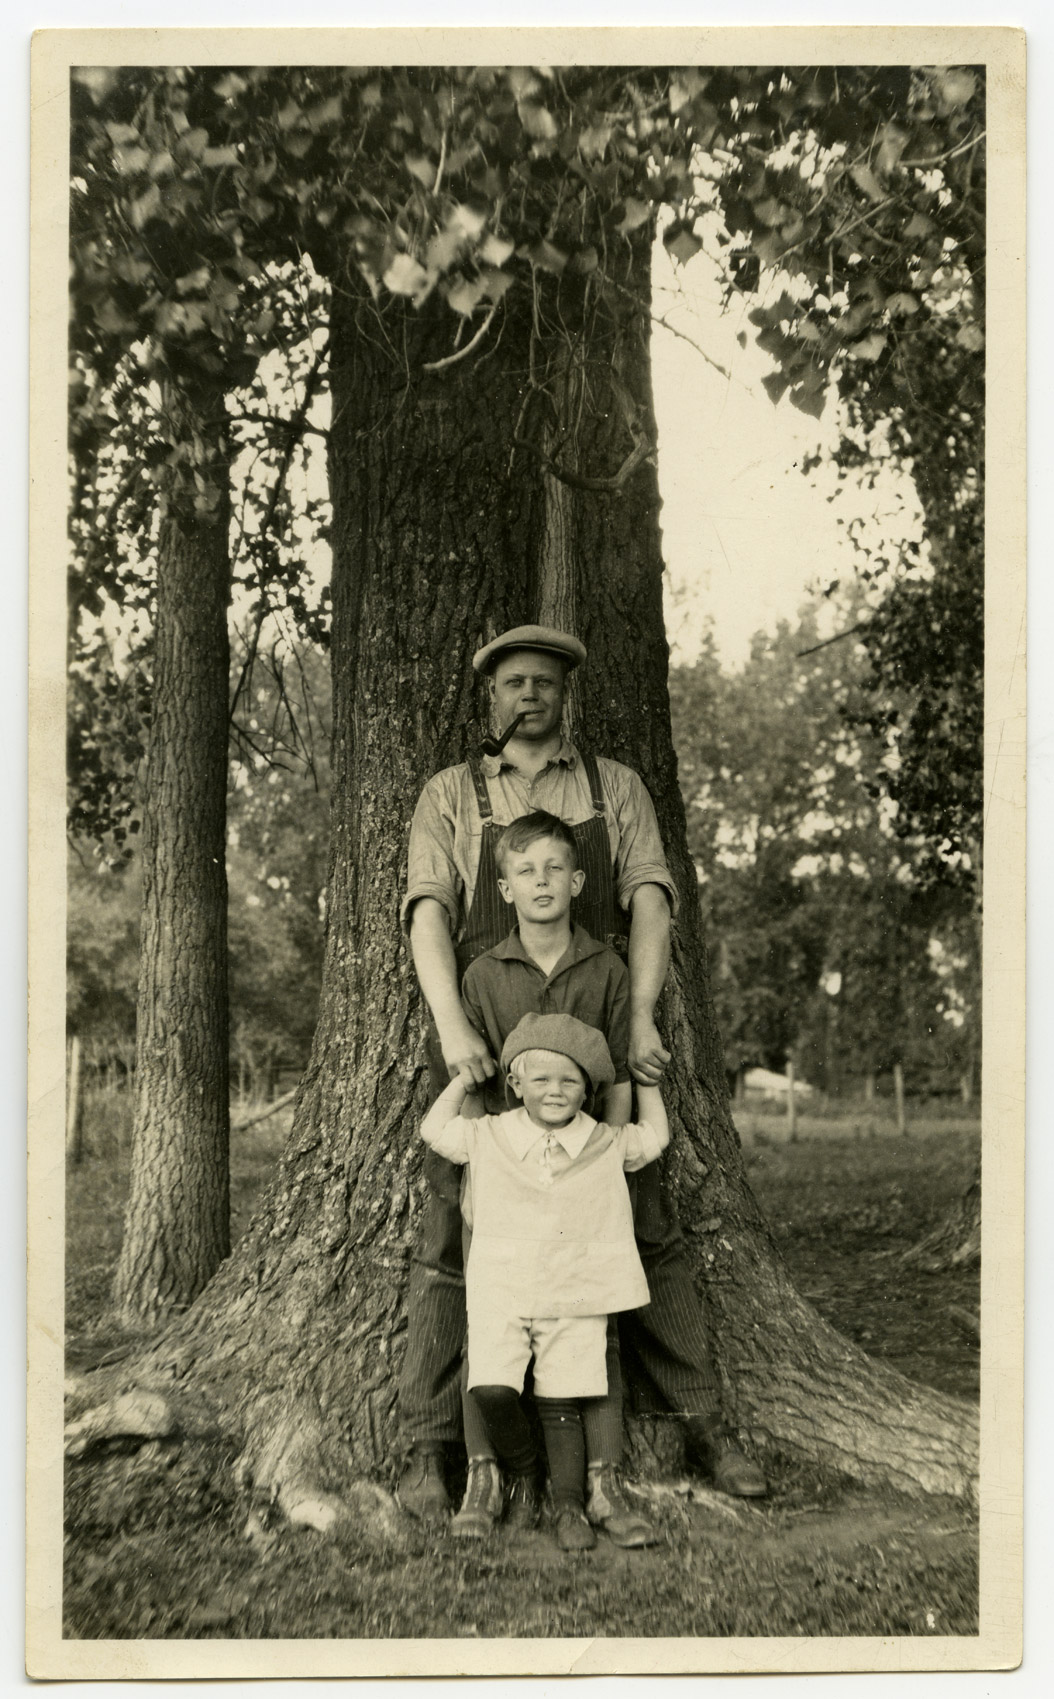 Mr. Wold’s son, A. N. Wold and his two sons